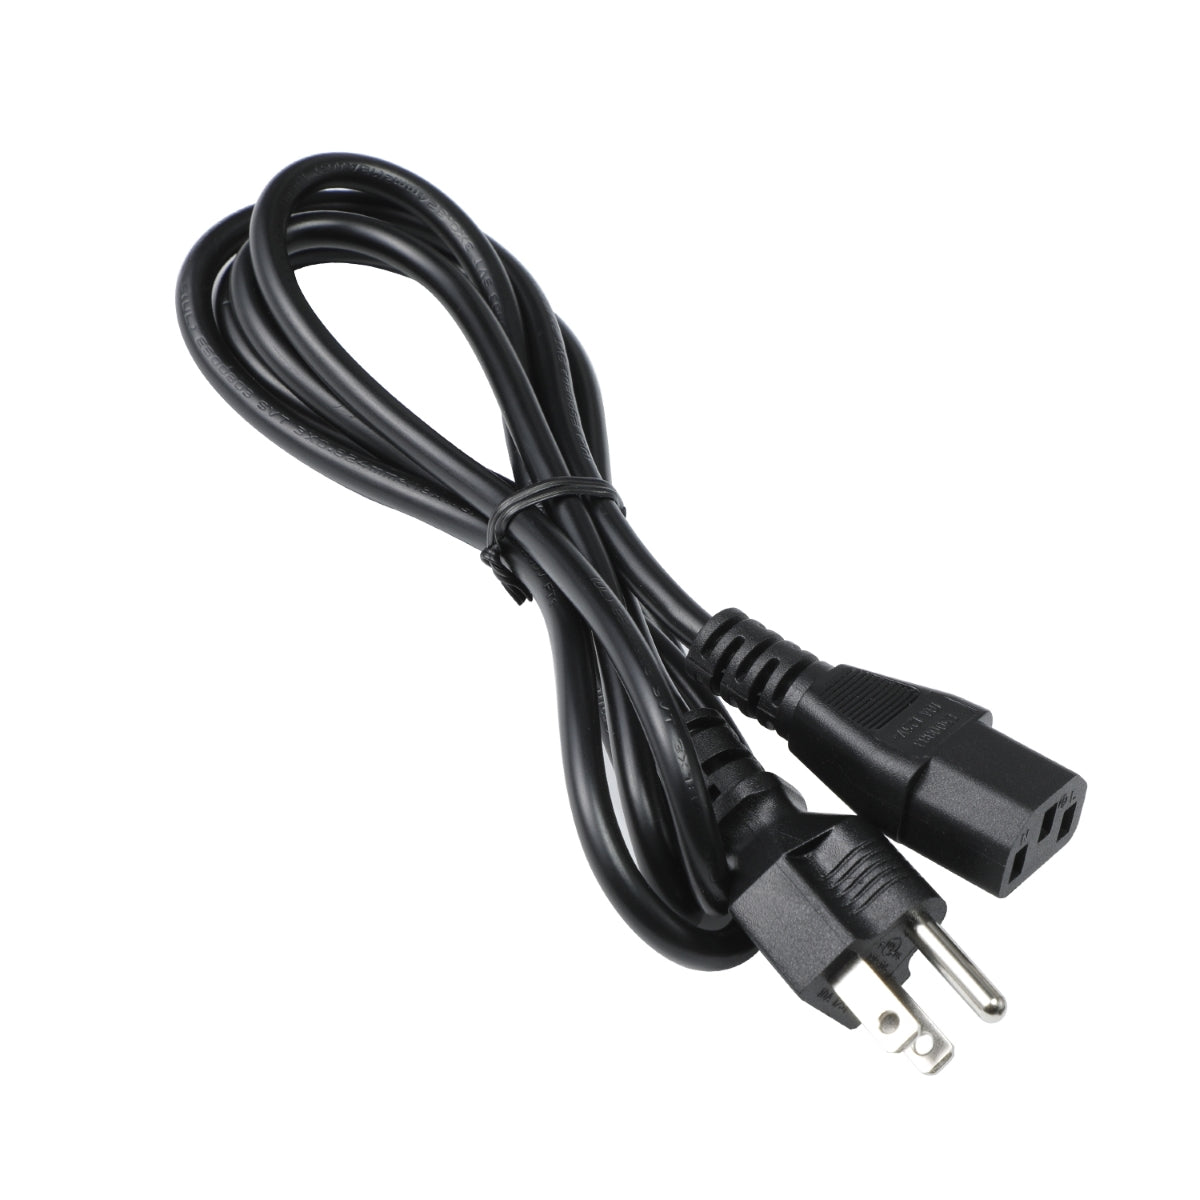 Power Cord for ViewSonic VP2458 Display Monitor.